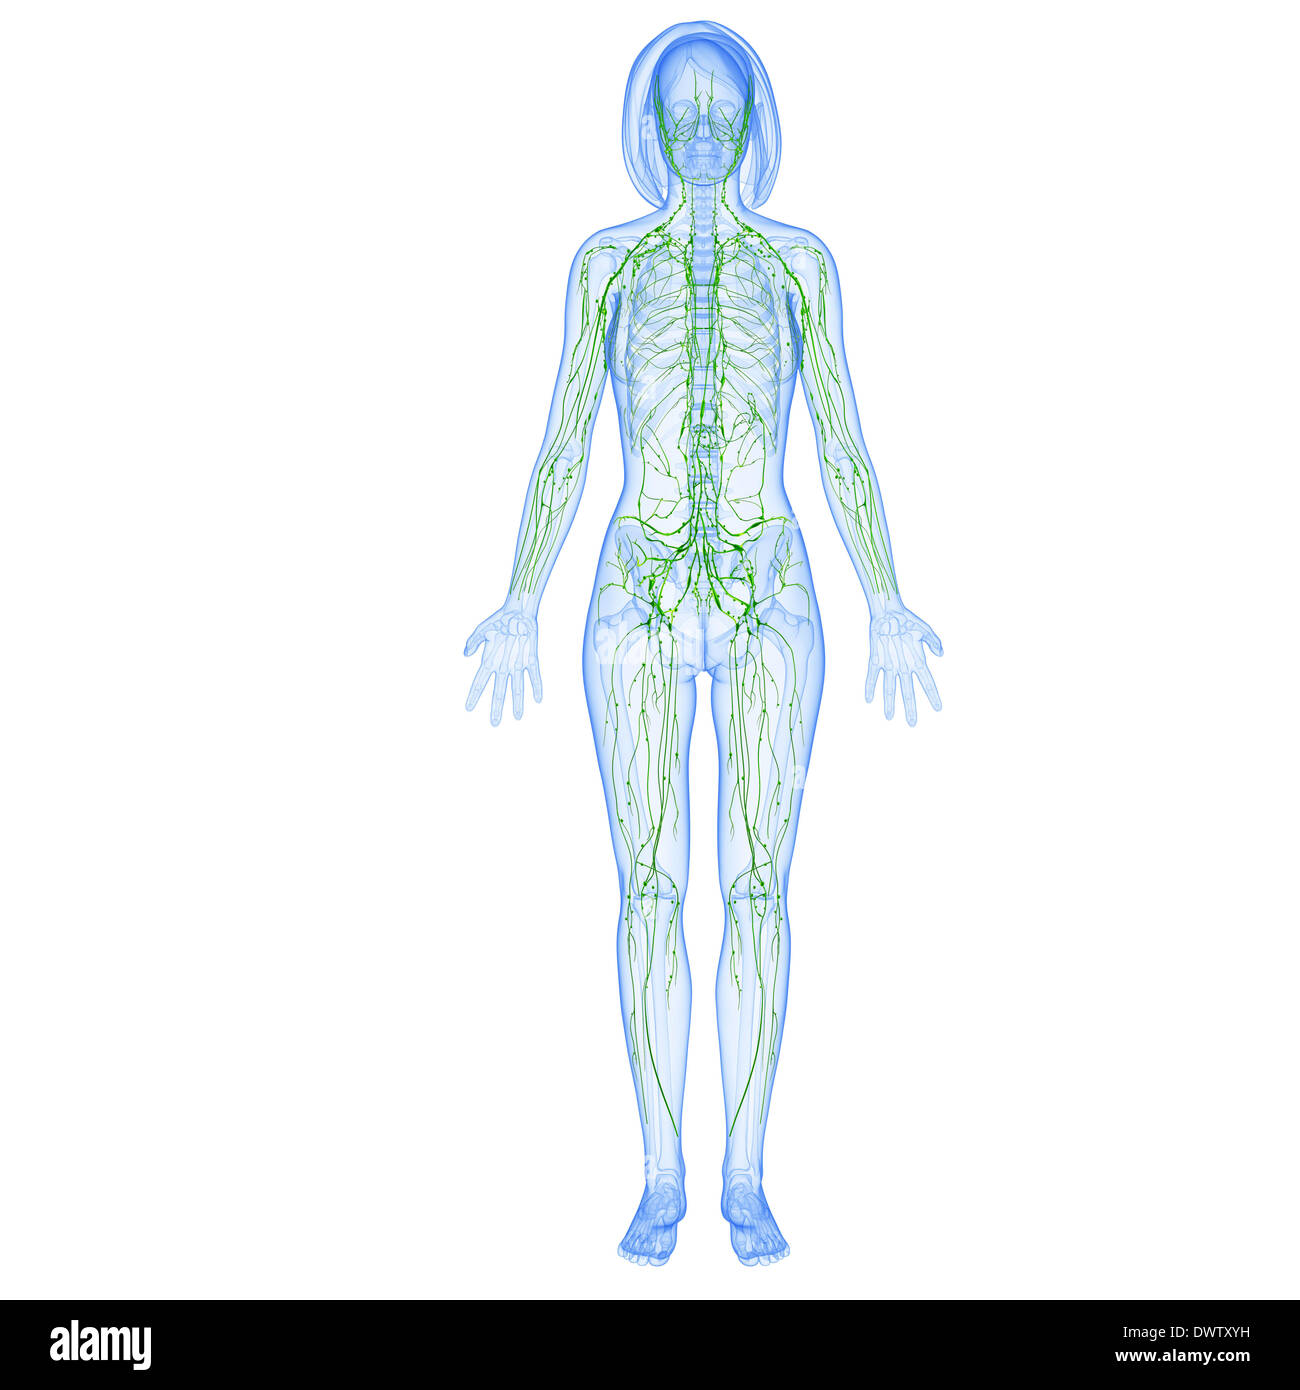 Lymphatic System High Resolution Stock Photography and Images - Alamy